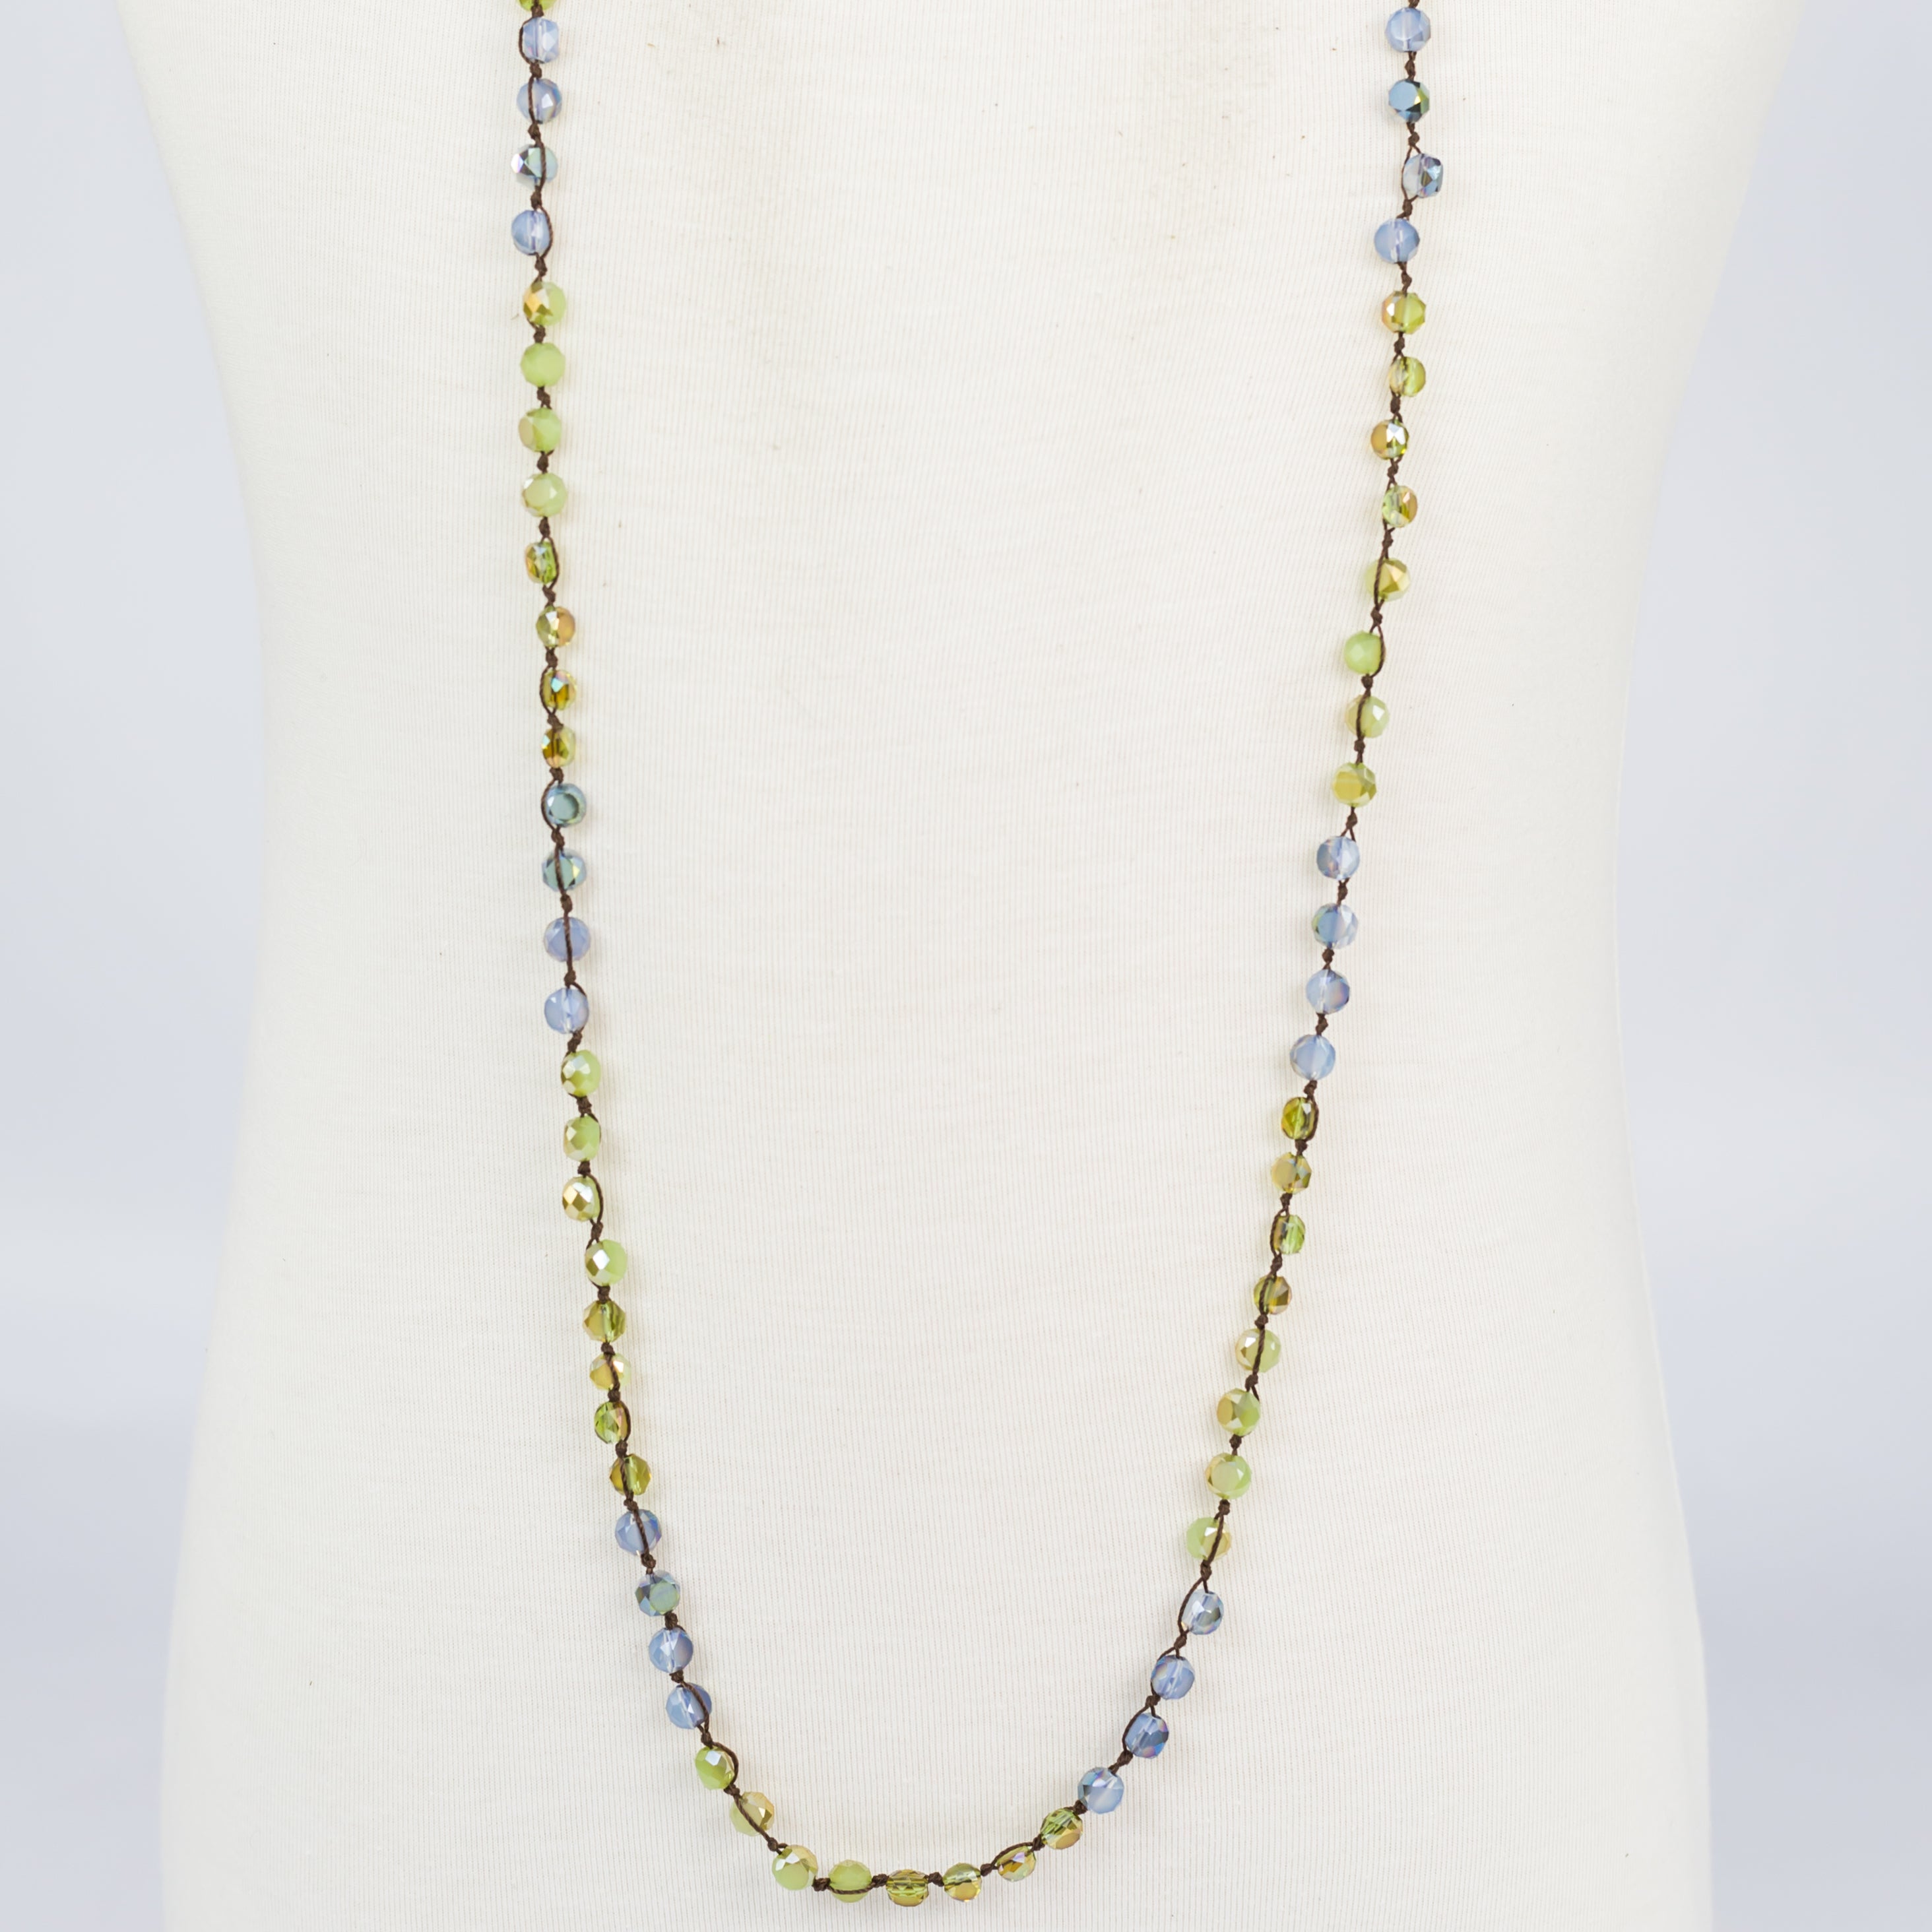 Simple Knotted Crystal Beads Long Necklace N2358